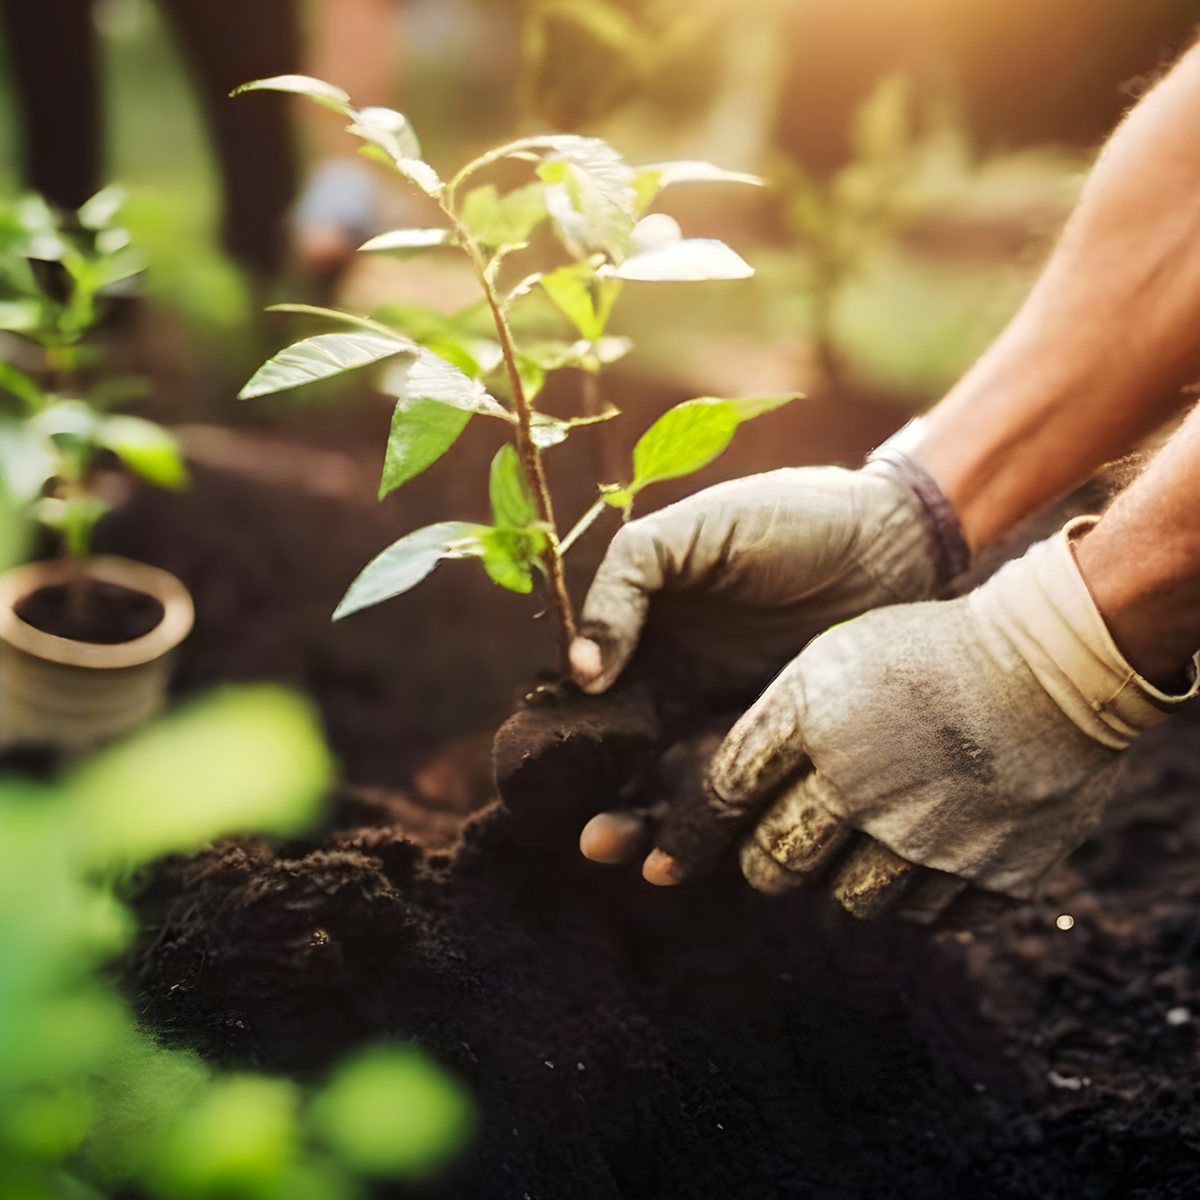 A pair of hands planting a small green tree into the soil